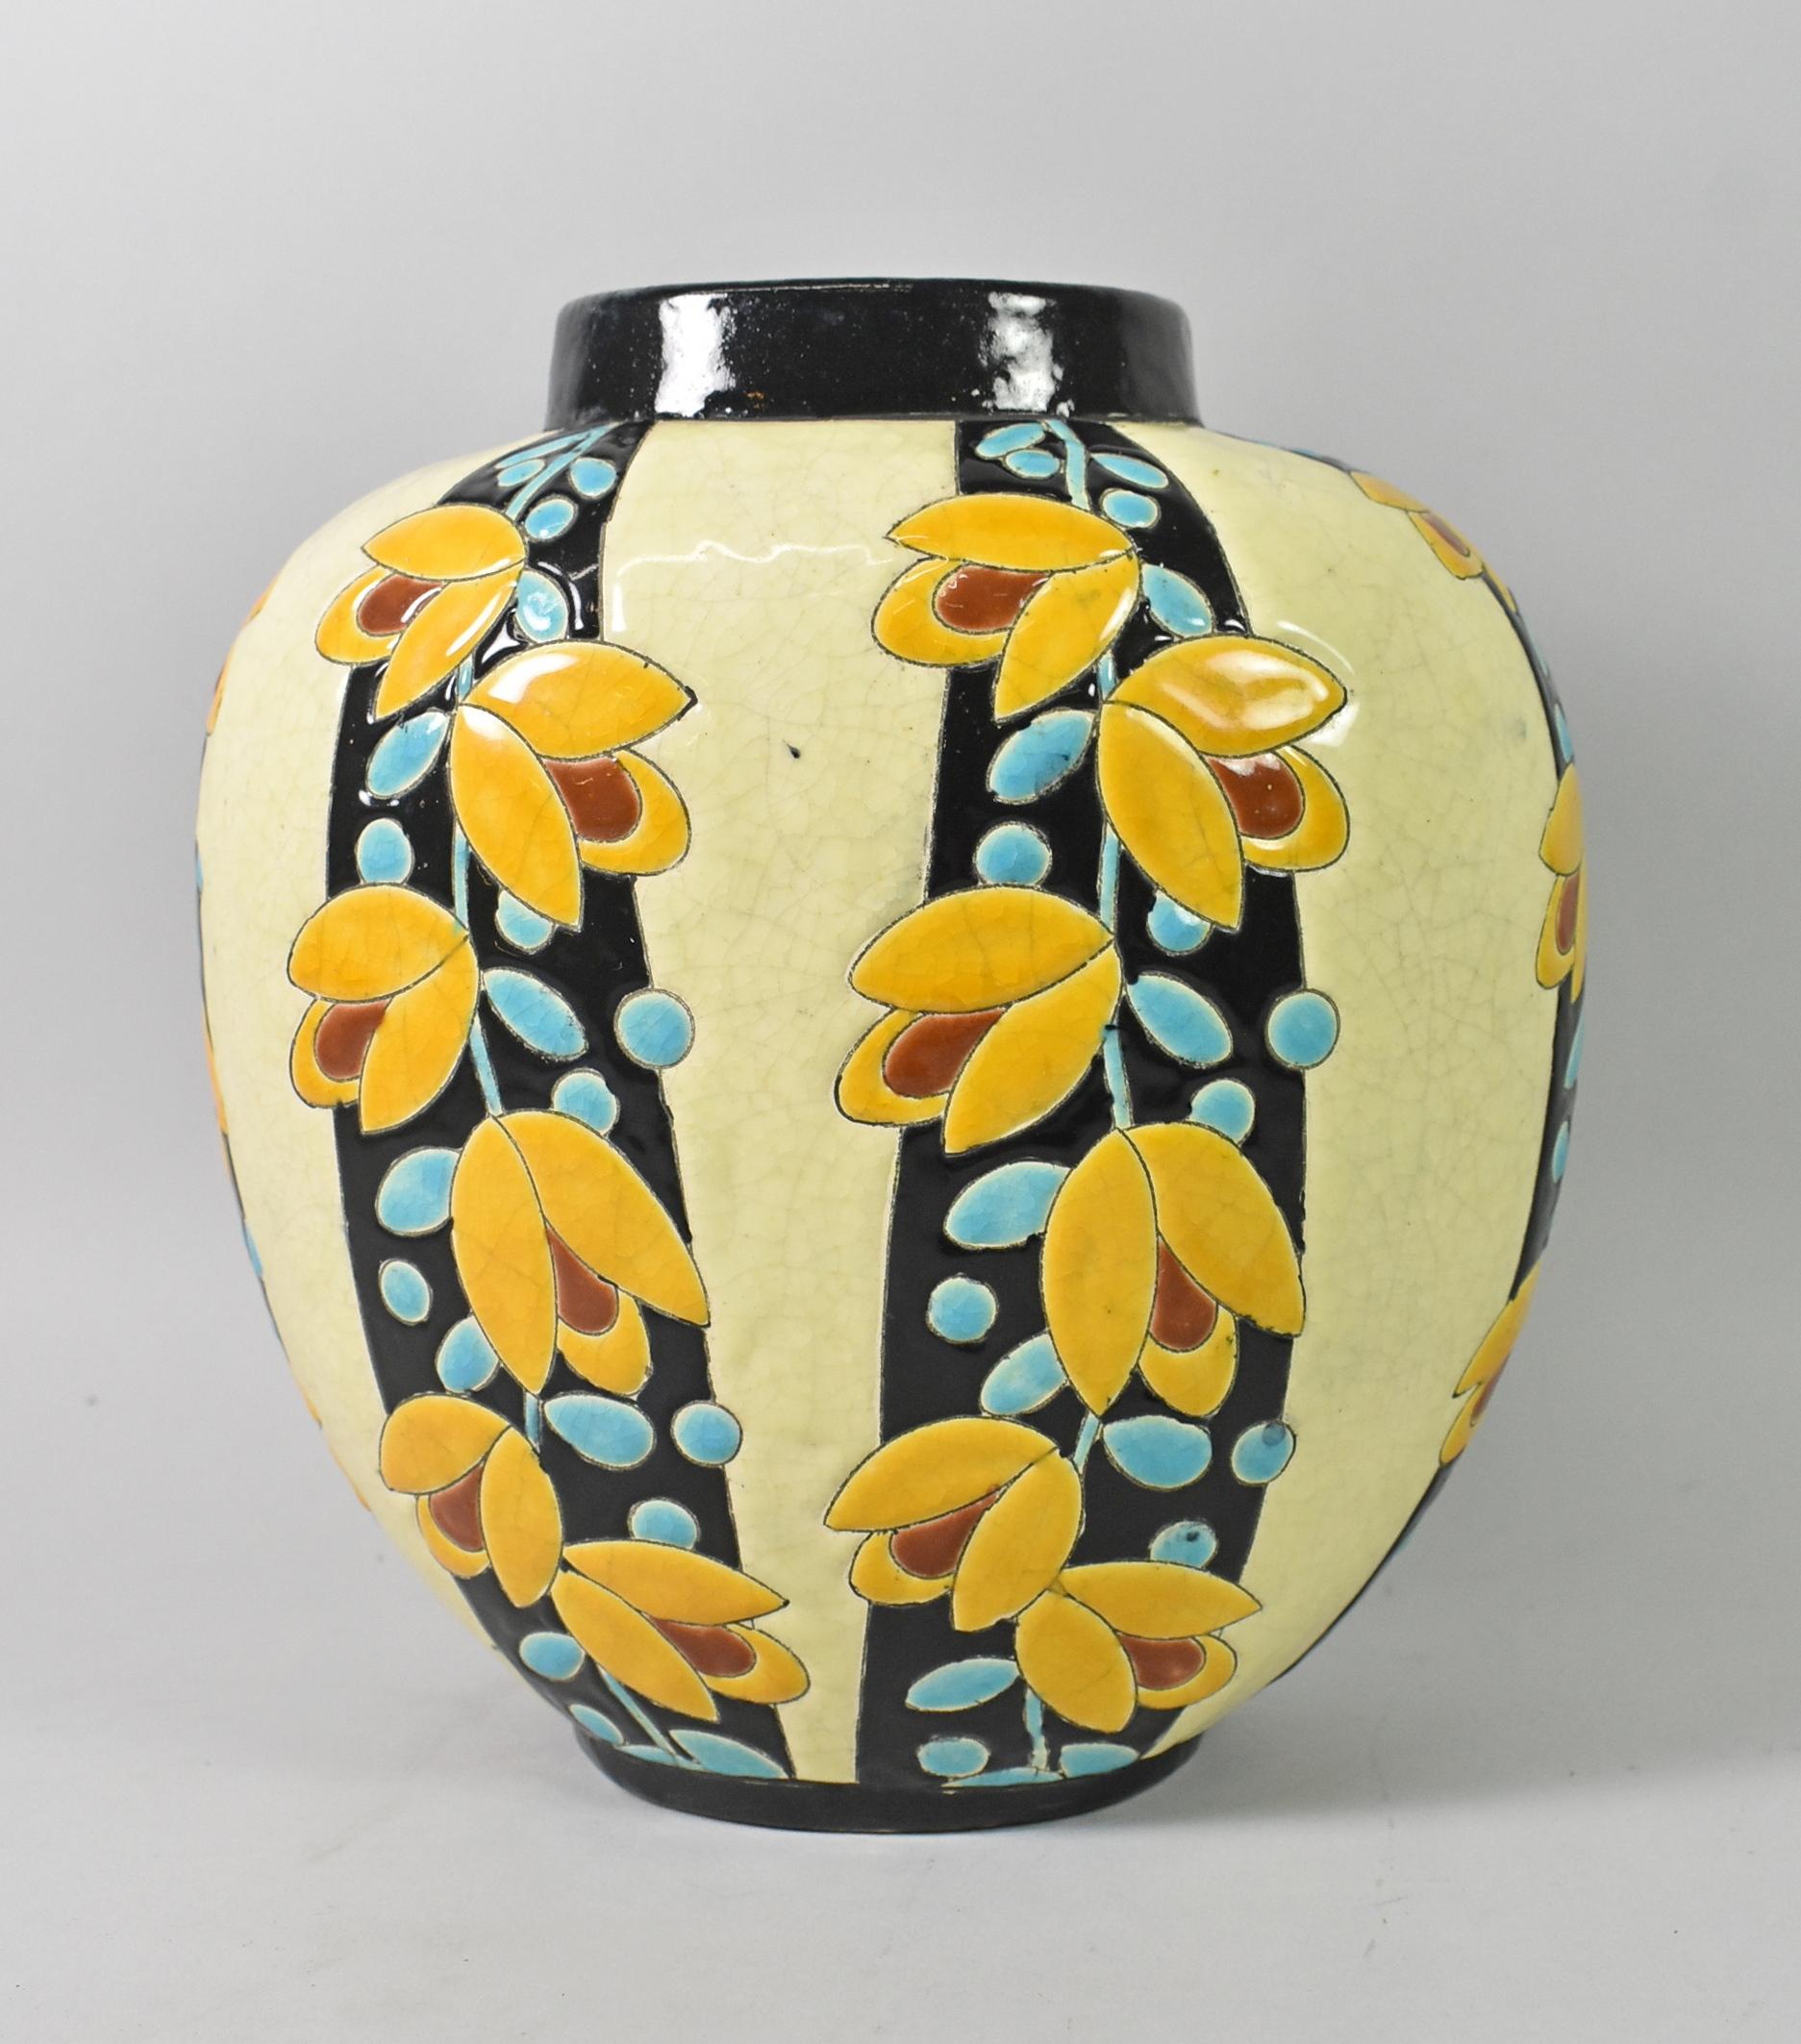 This beautiful Art Deco vase by Charles Catteau for Boch Freres is black and butter yellow and decorated with aqua stems and leaves with mustard and rust flowers. This piece has a crackled enamel finish and is 9 1/4